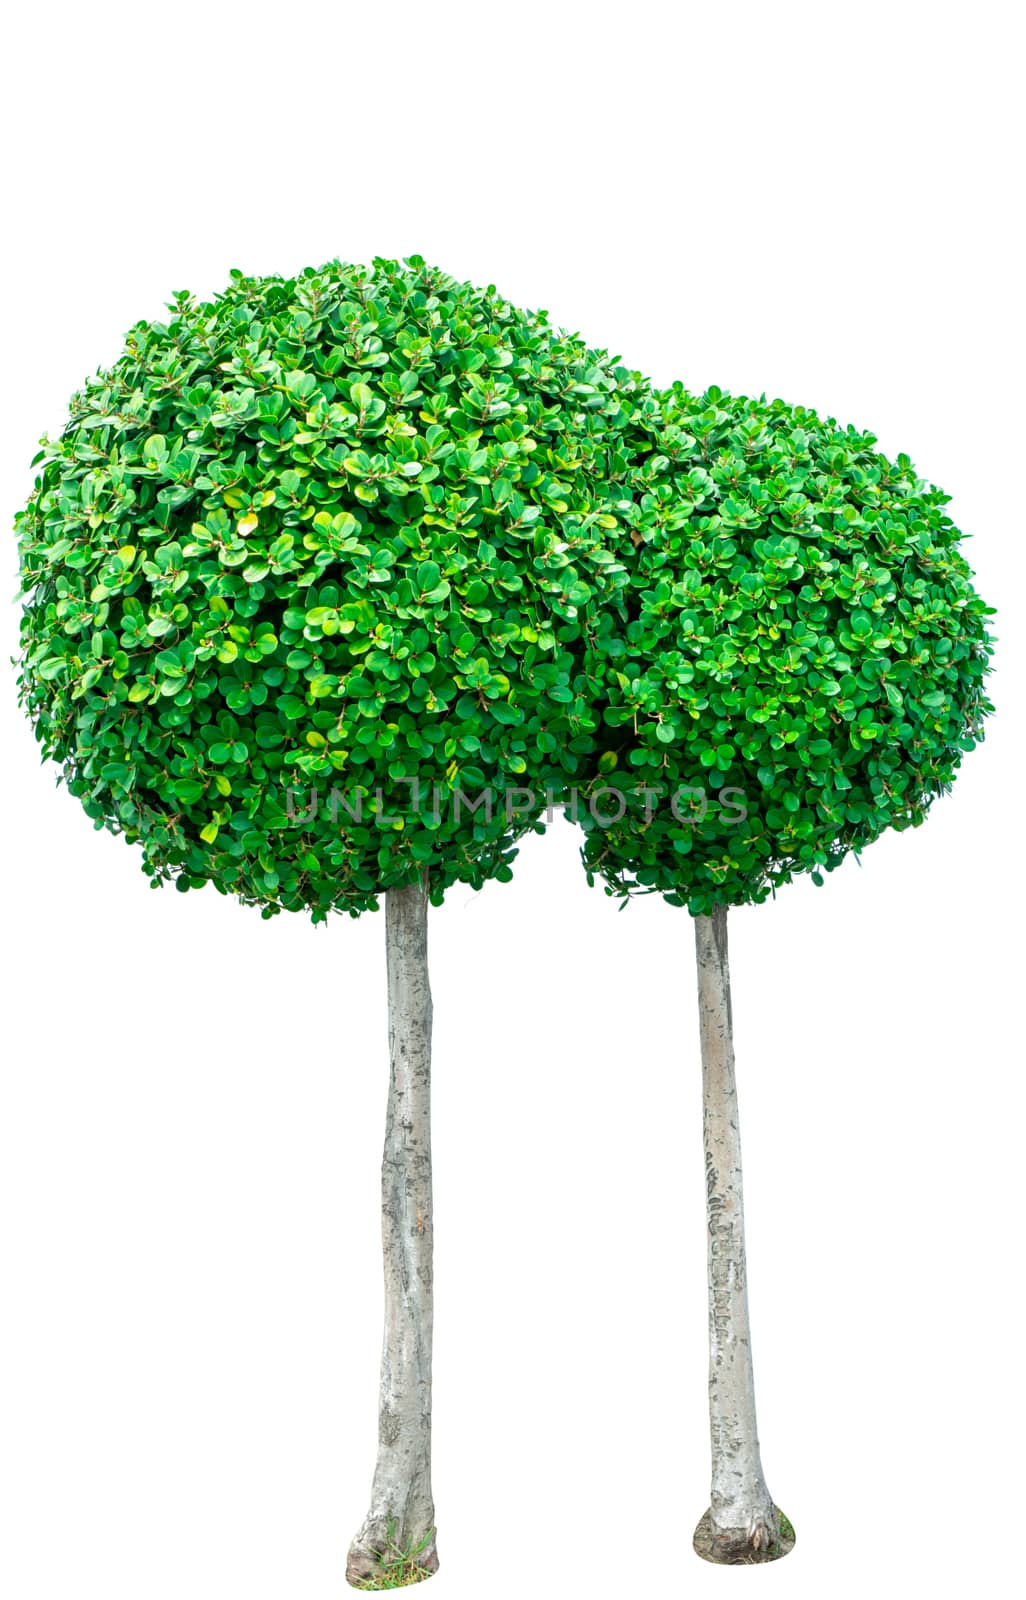 Circle shaped green tree for decorative isolated on white background. Garden decoration with trimmed bush. Green bushes for Japanese style garden design. Ornamental tree with round shape. Twin shrub. by Fahroni